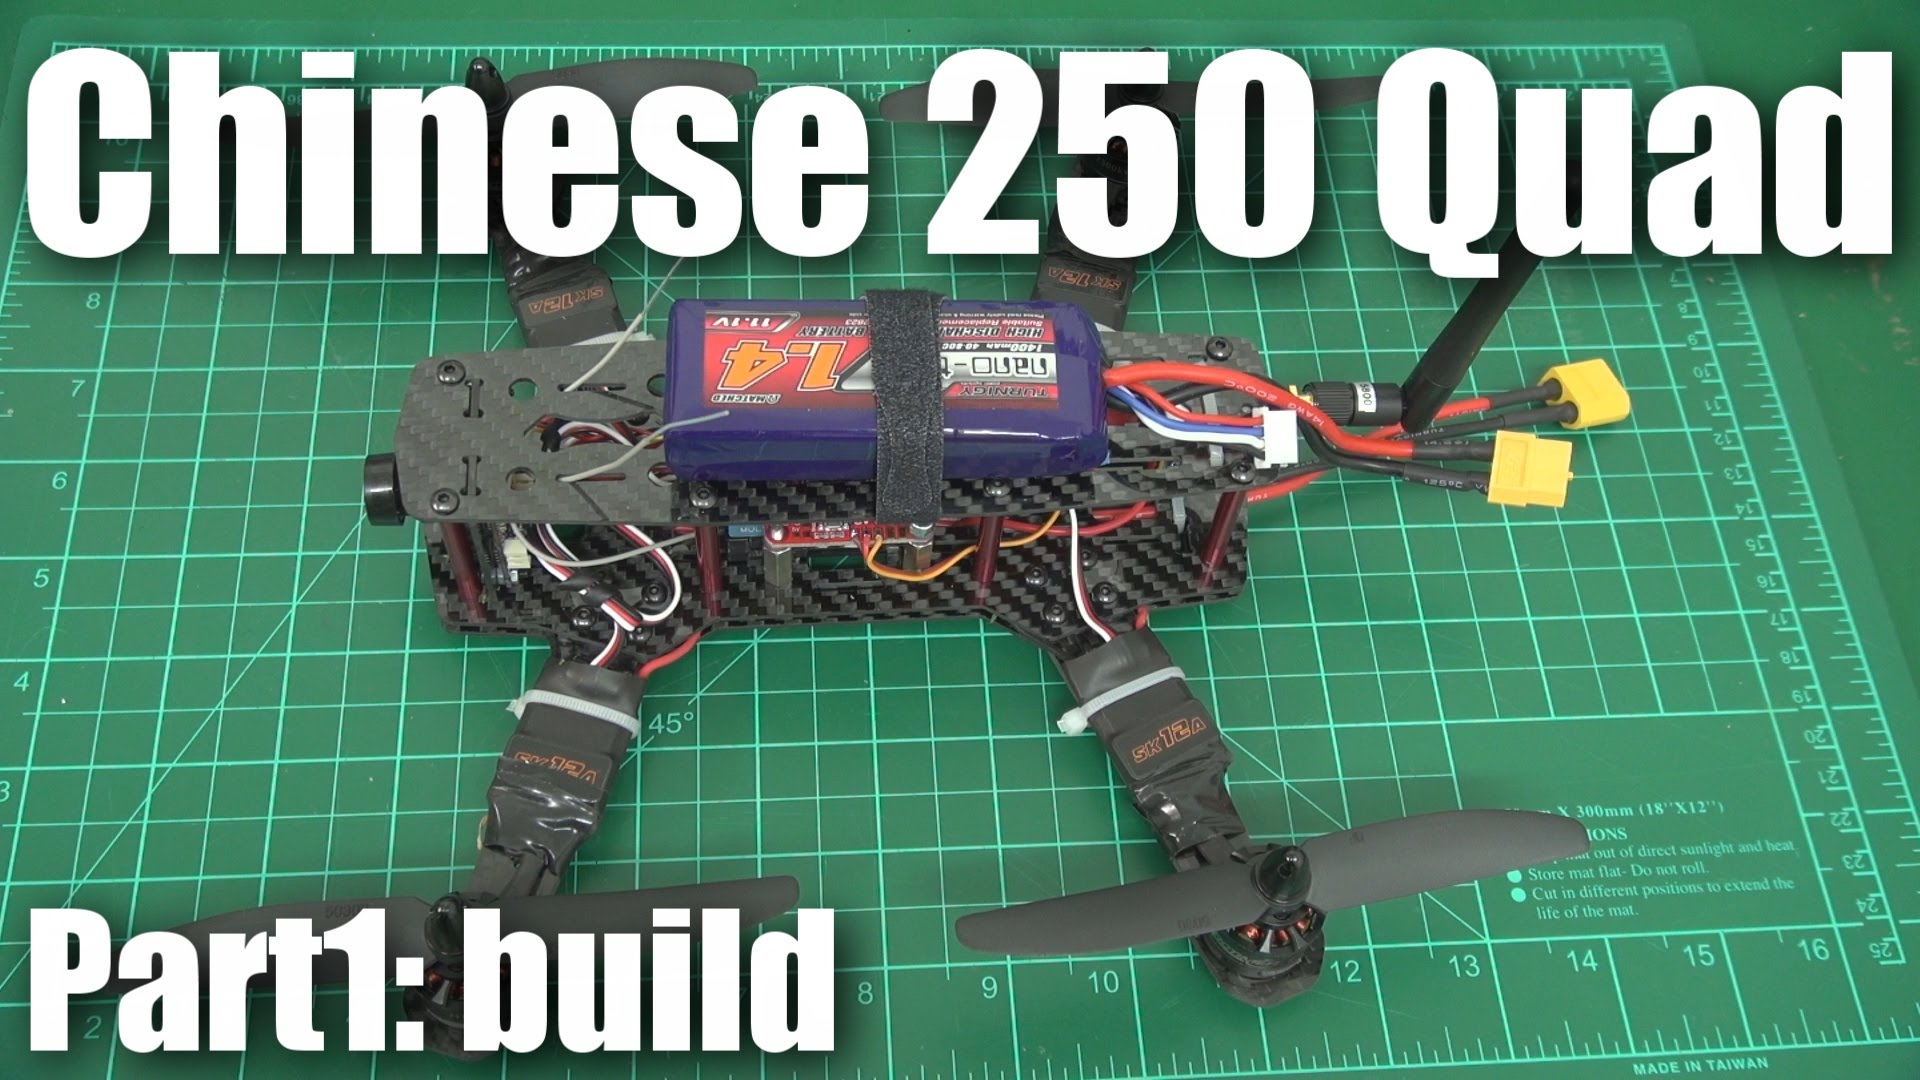 Review: Cheap carbon Chinese 250-size mini quadcopter (part 1)